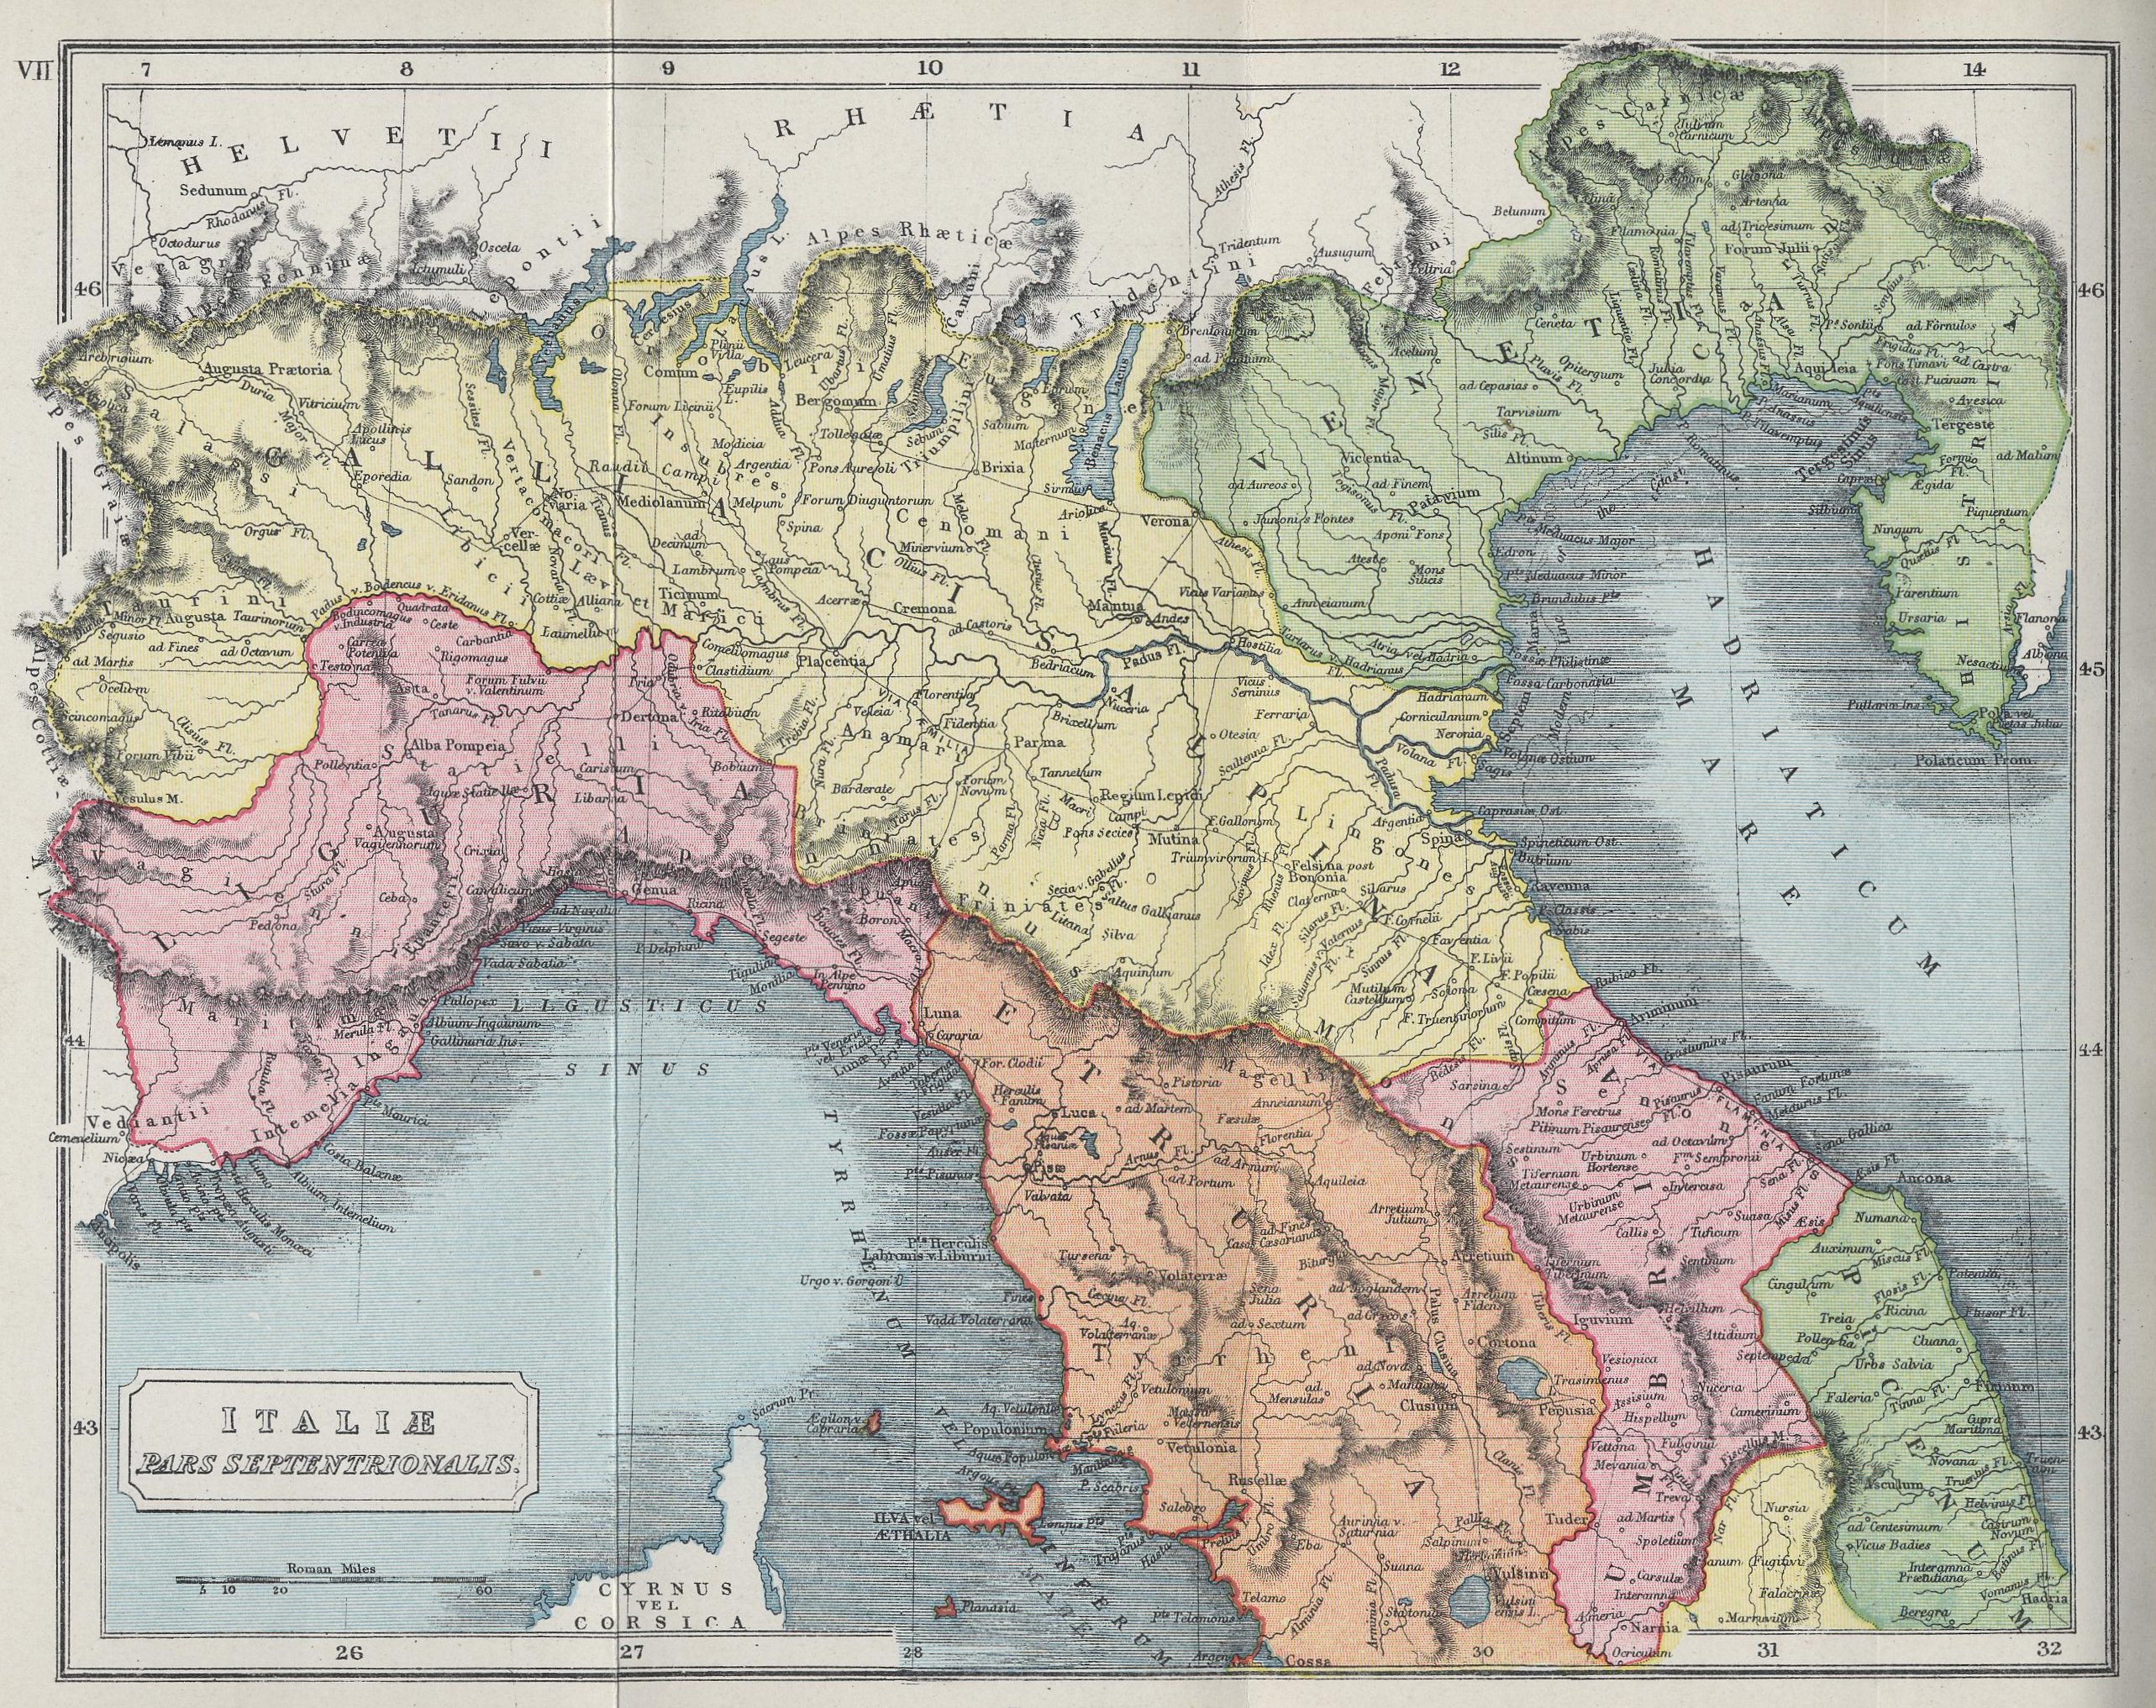 Map of Northern Italy70 BC - AD 180